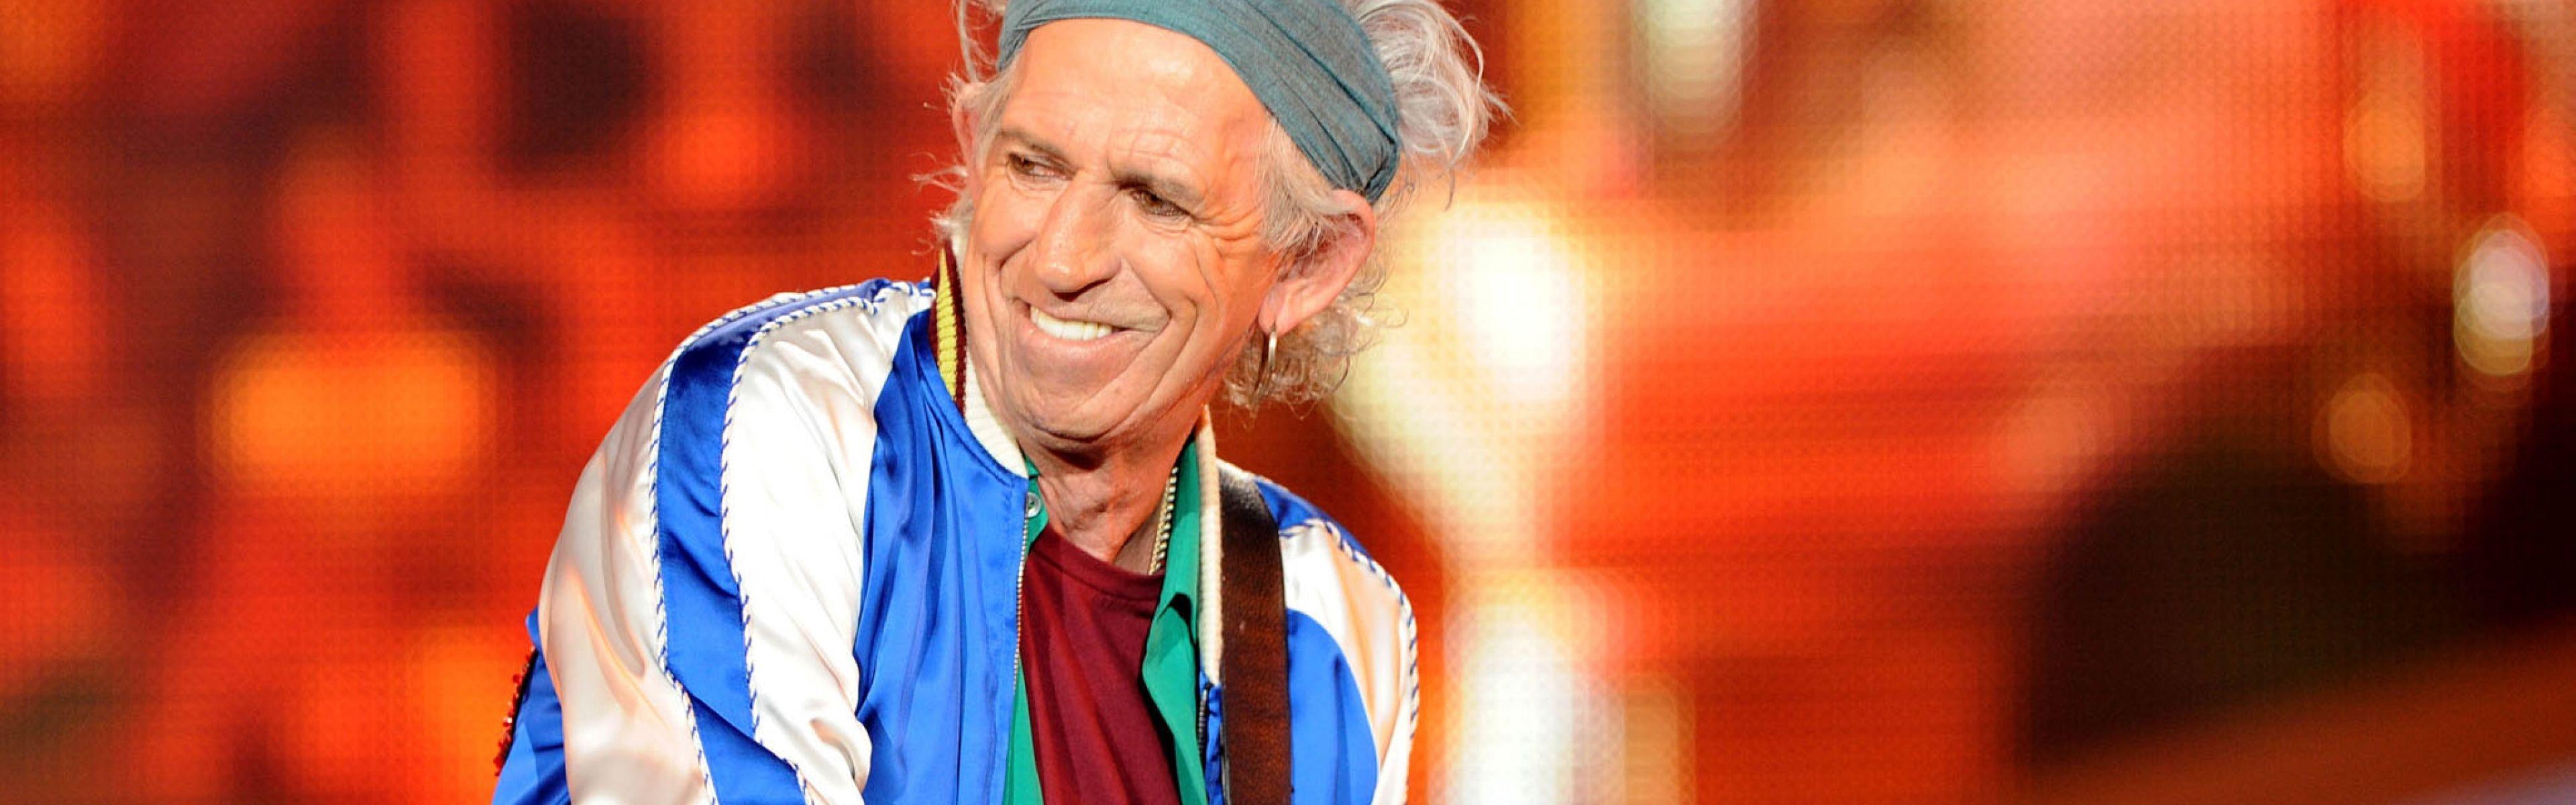 Download Wallpaper 3840x1200 Keith richards, The rolling stones